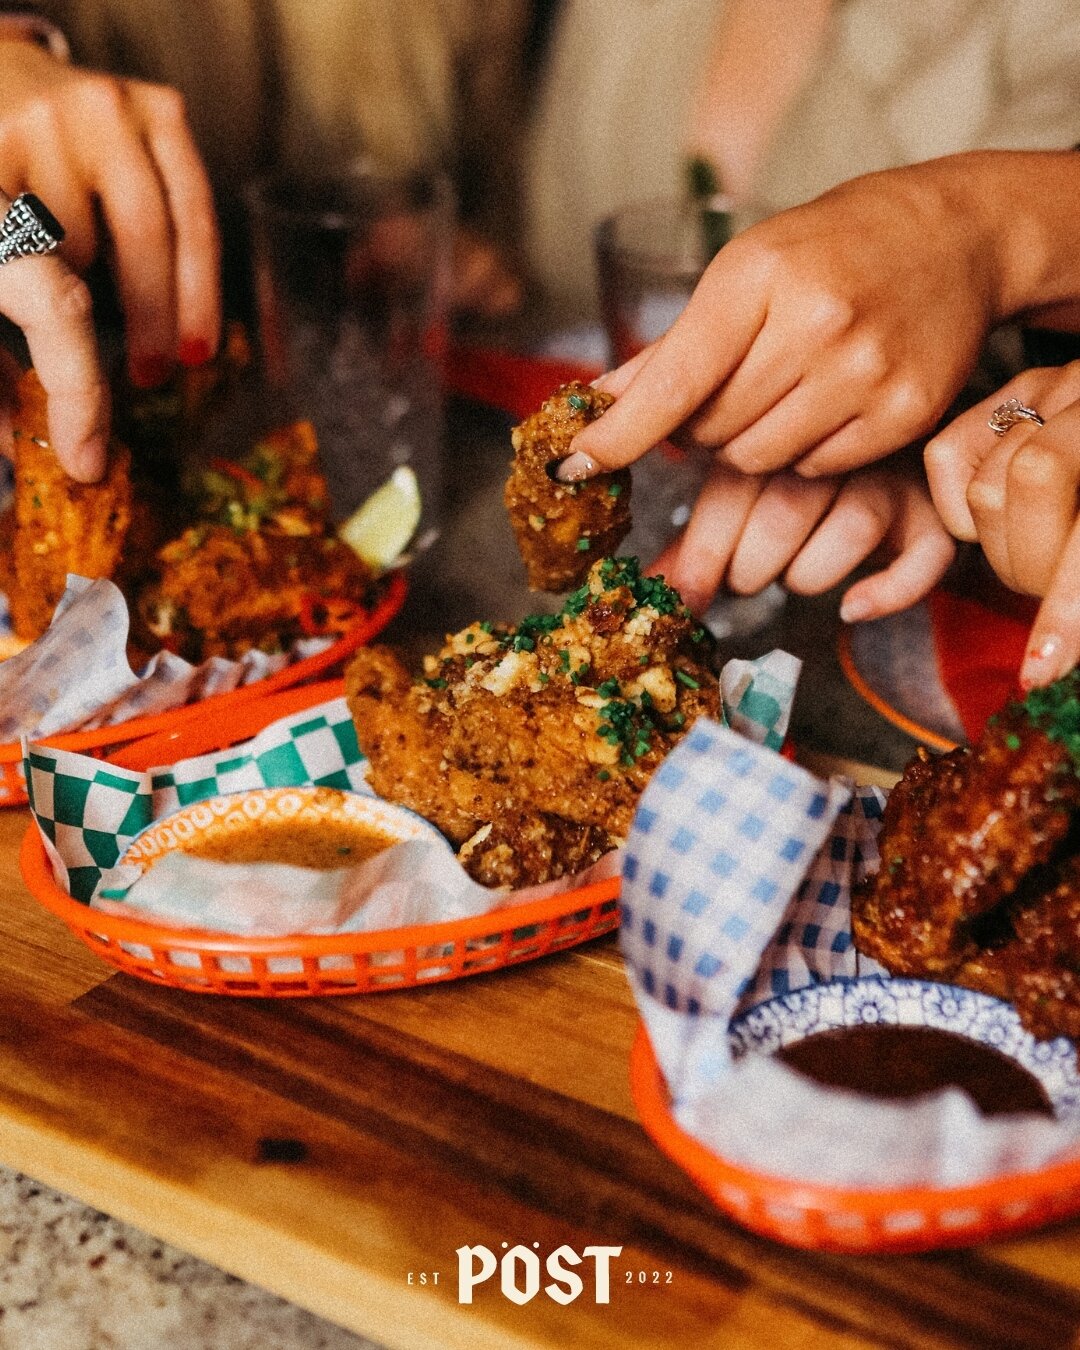 Dig into our Wunderbar Wings &amp; 2-4-1 cocktails!

90 mins of Bottomless Wings. Choose from; Hot, BBQ, Honey and Mustard flavours.

4pm till 10pm, last orders 8.30pm. Happy Thursday!

Book your table now, link in bio.

#postbournemouth #hausofbotto